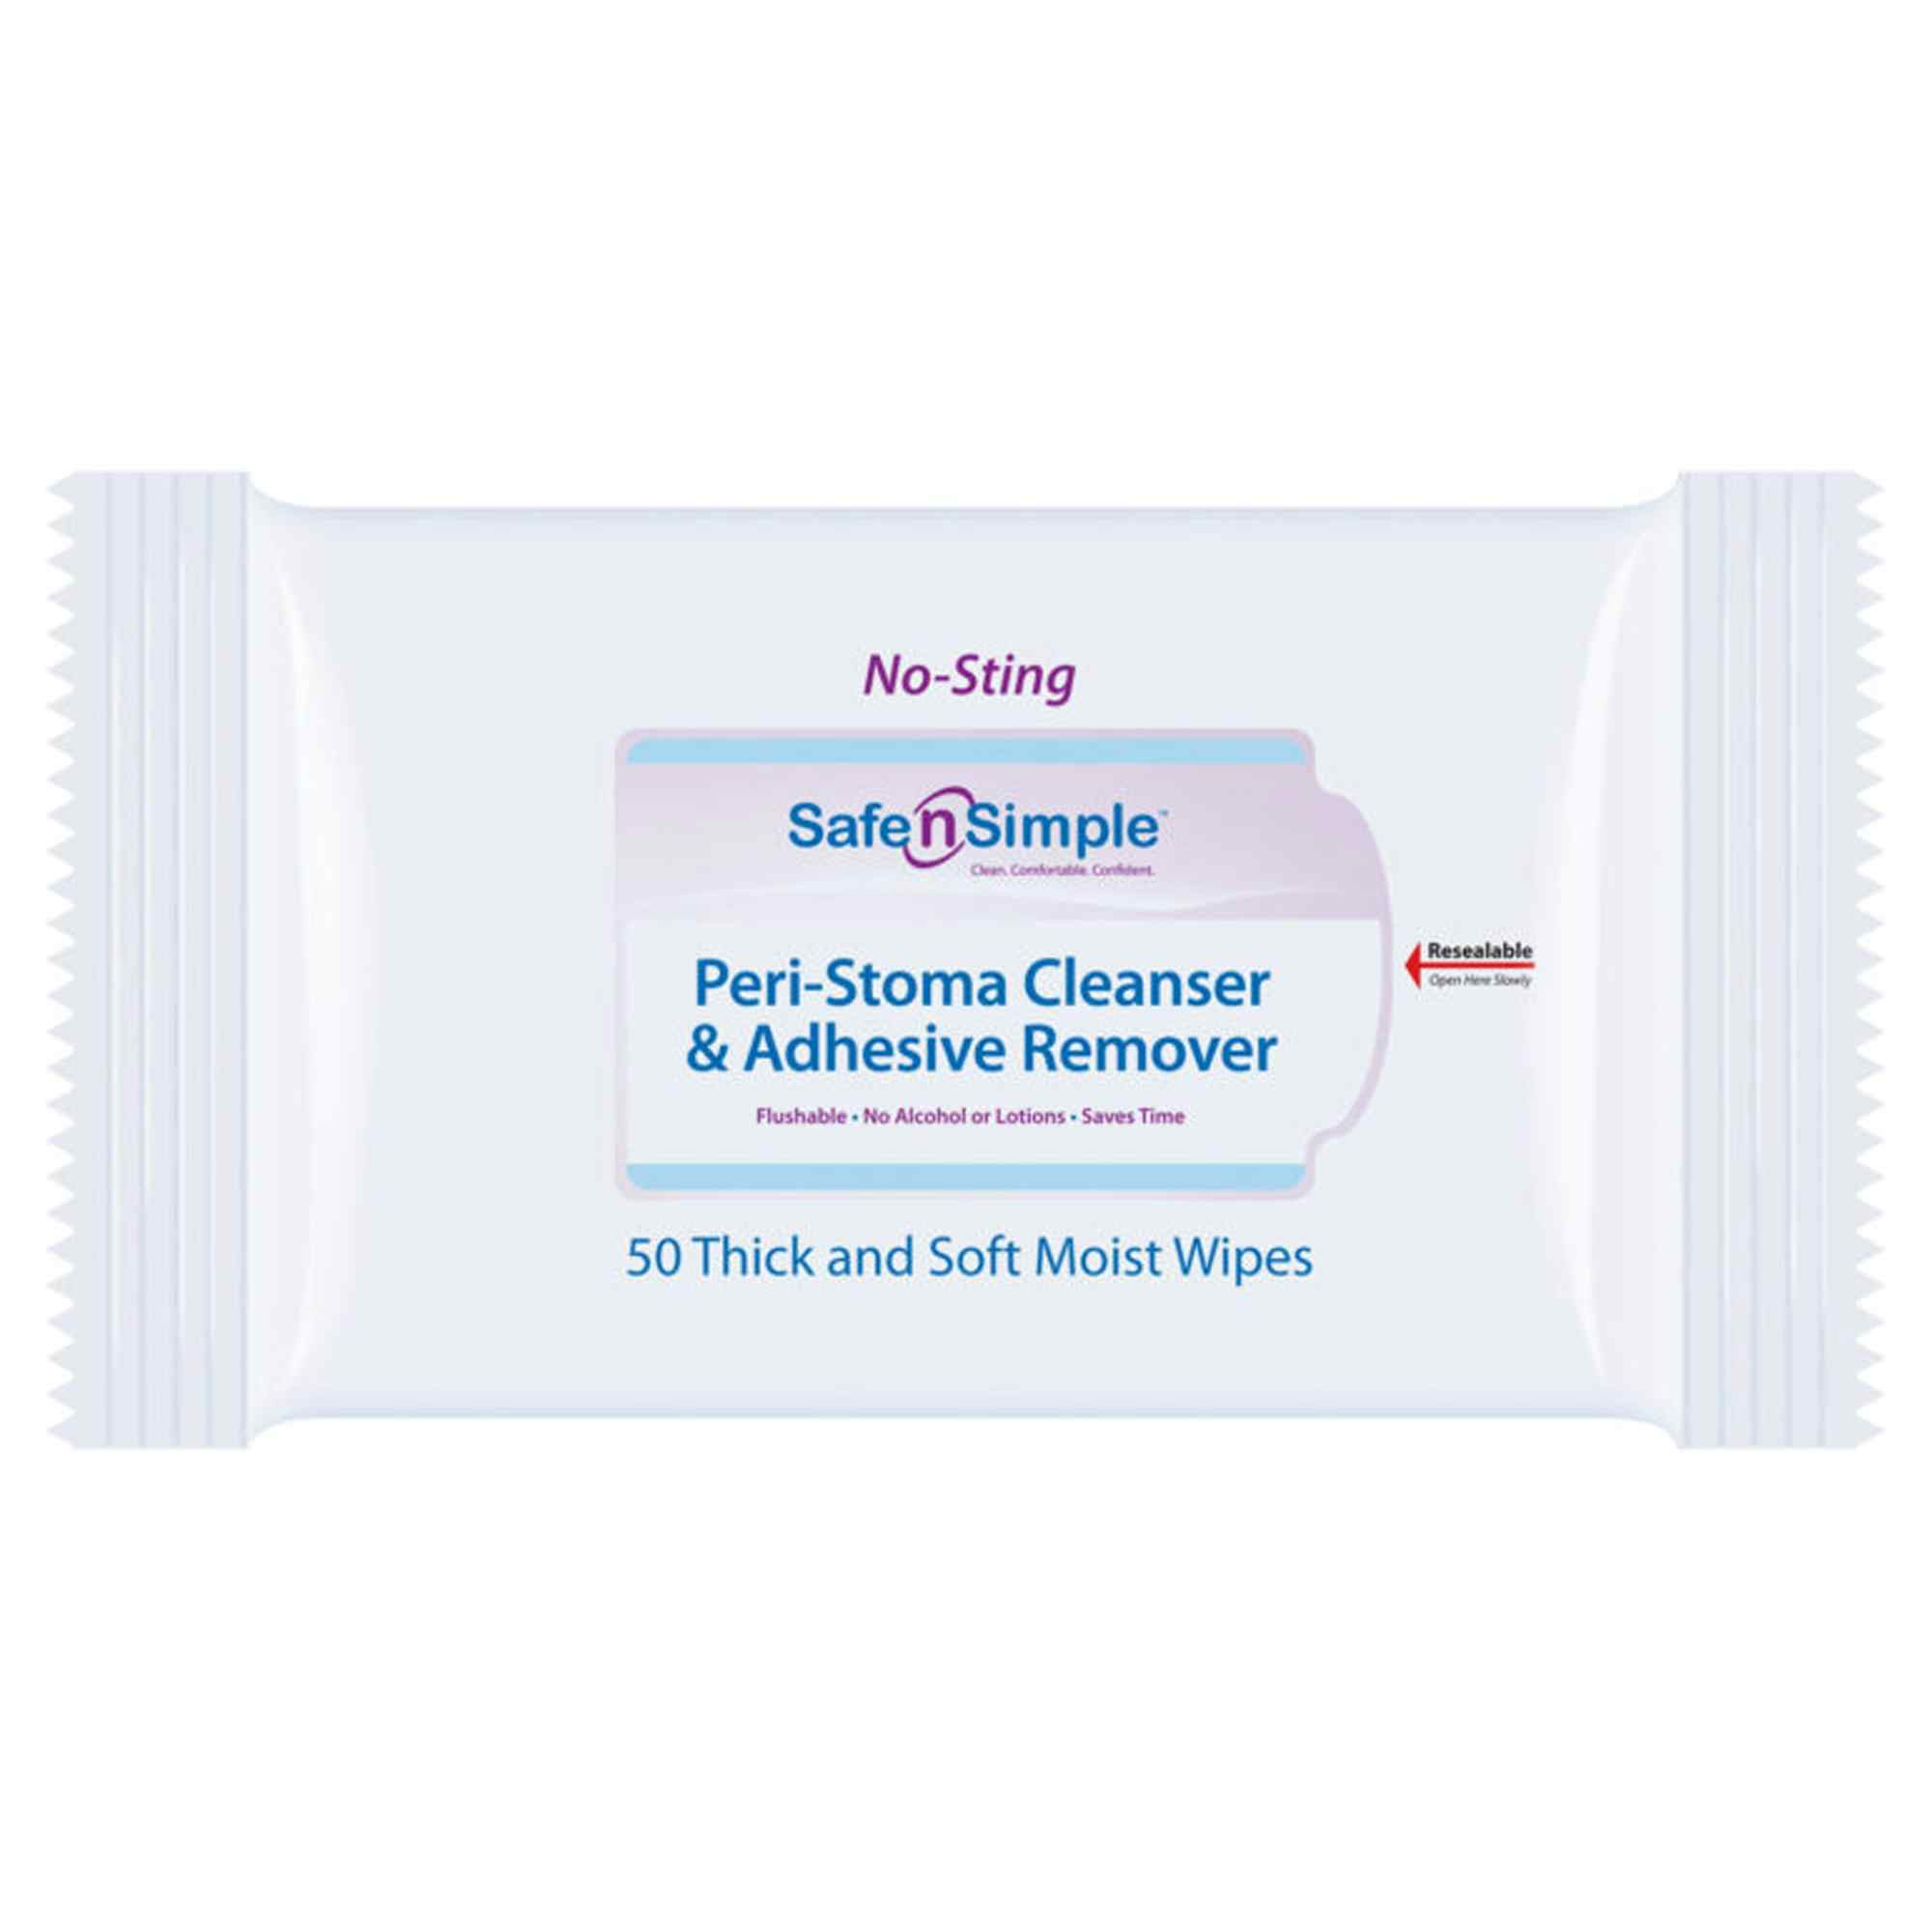 Safe n Simple Peri-Stoma Cleanser & Adhesive Remover Wipes, SNS00525, Case of 600 (12 Packs)